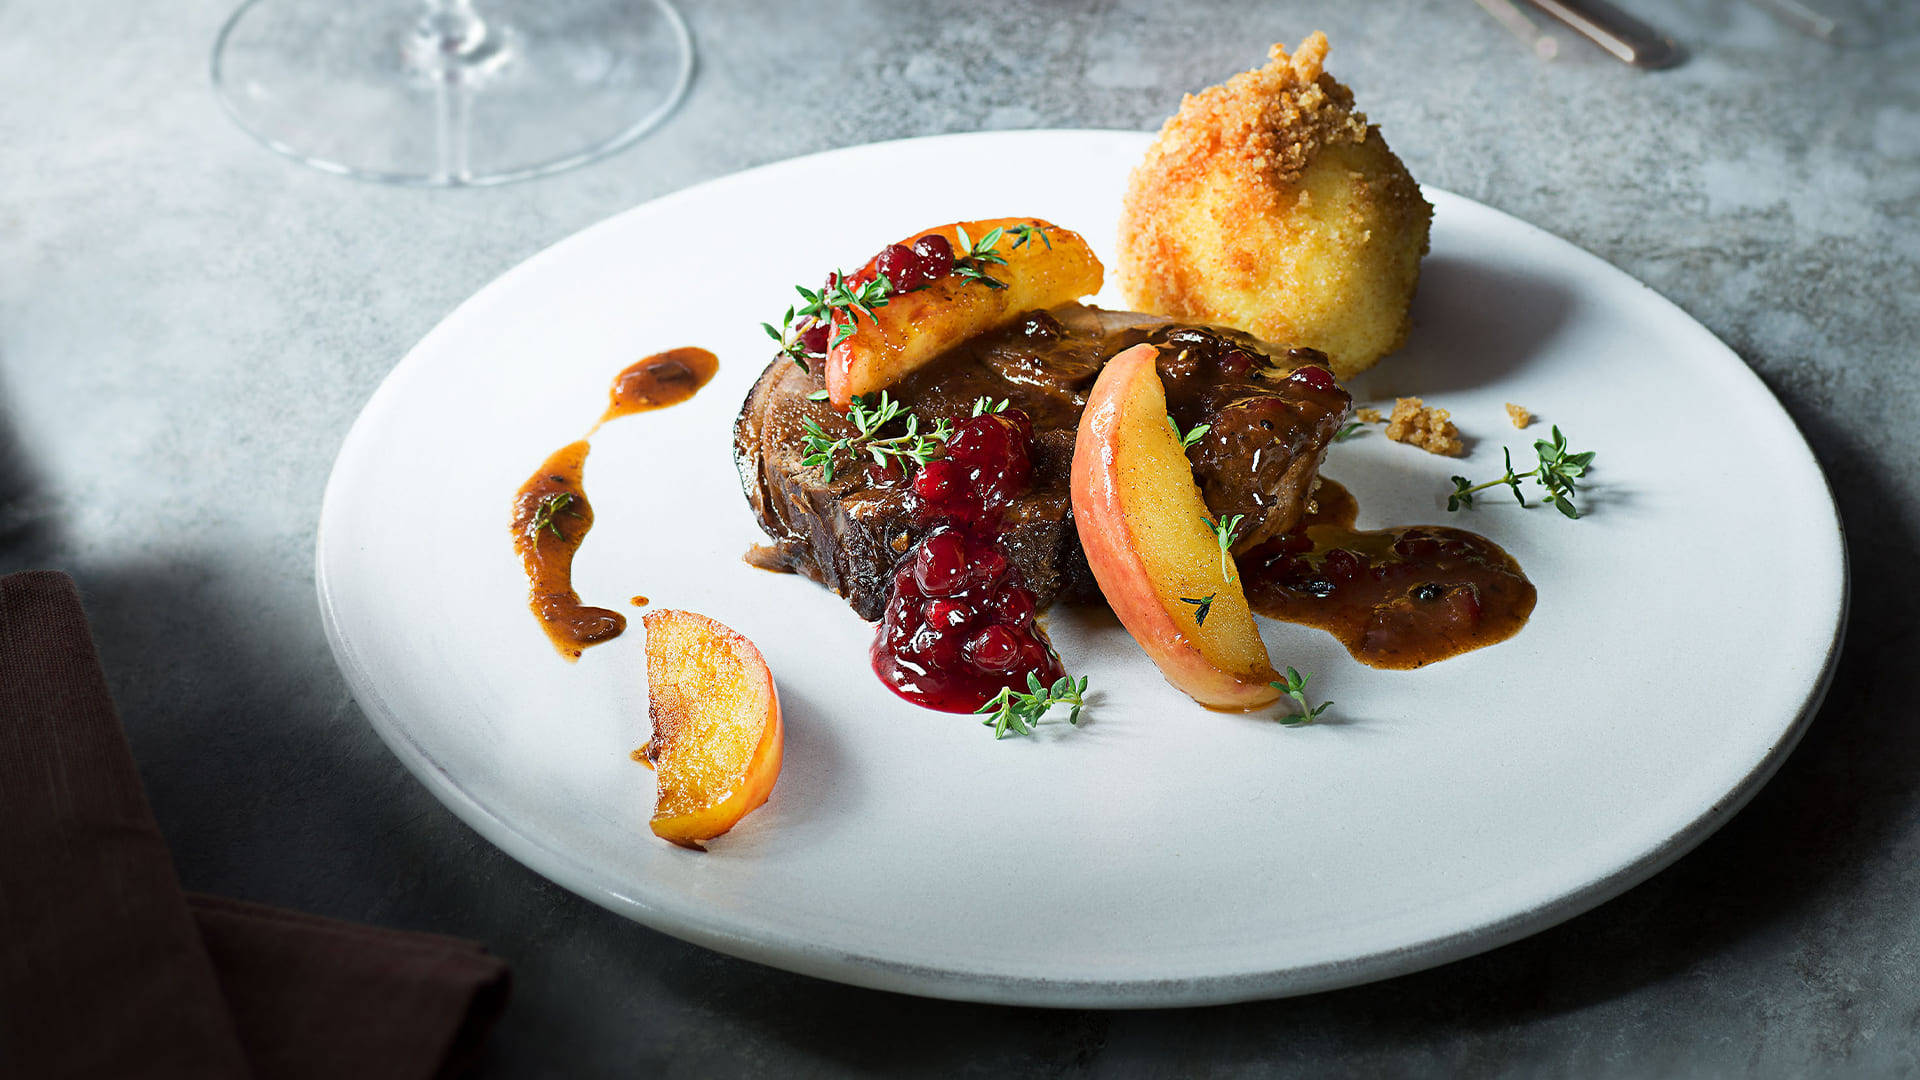 Sauerbraten - A Traditional German Dish served with Pomegranate Sauce Wallpaper